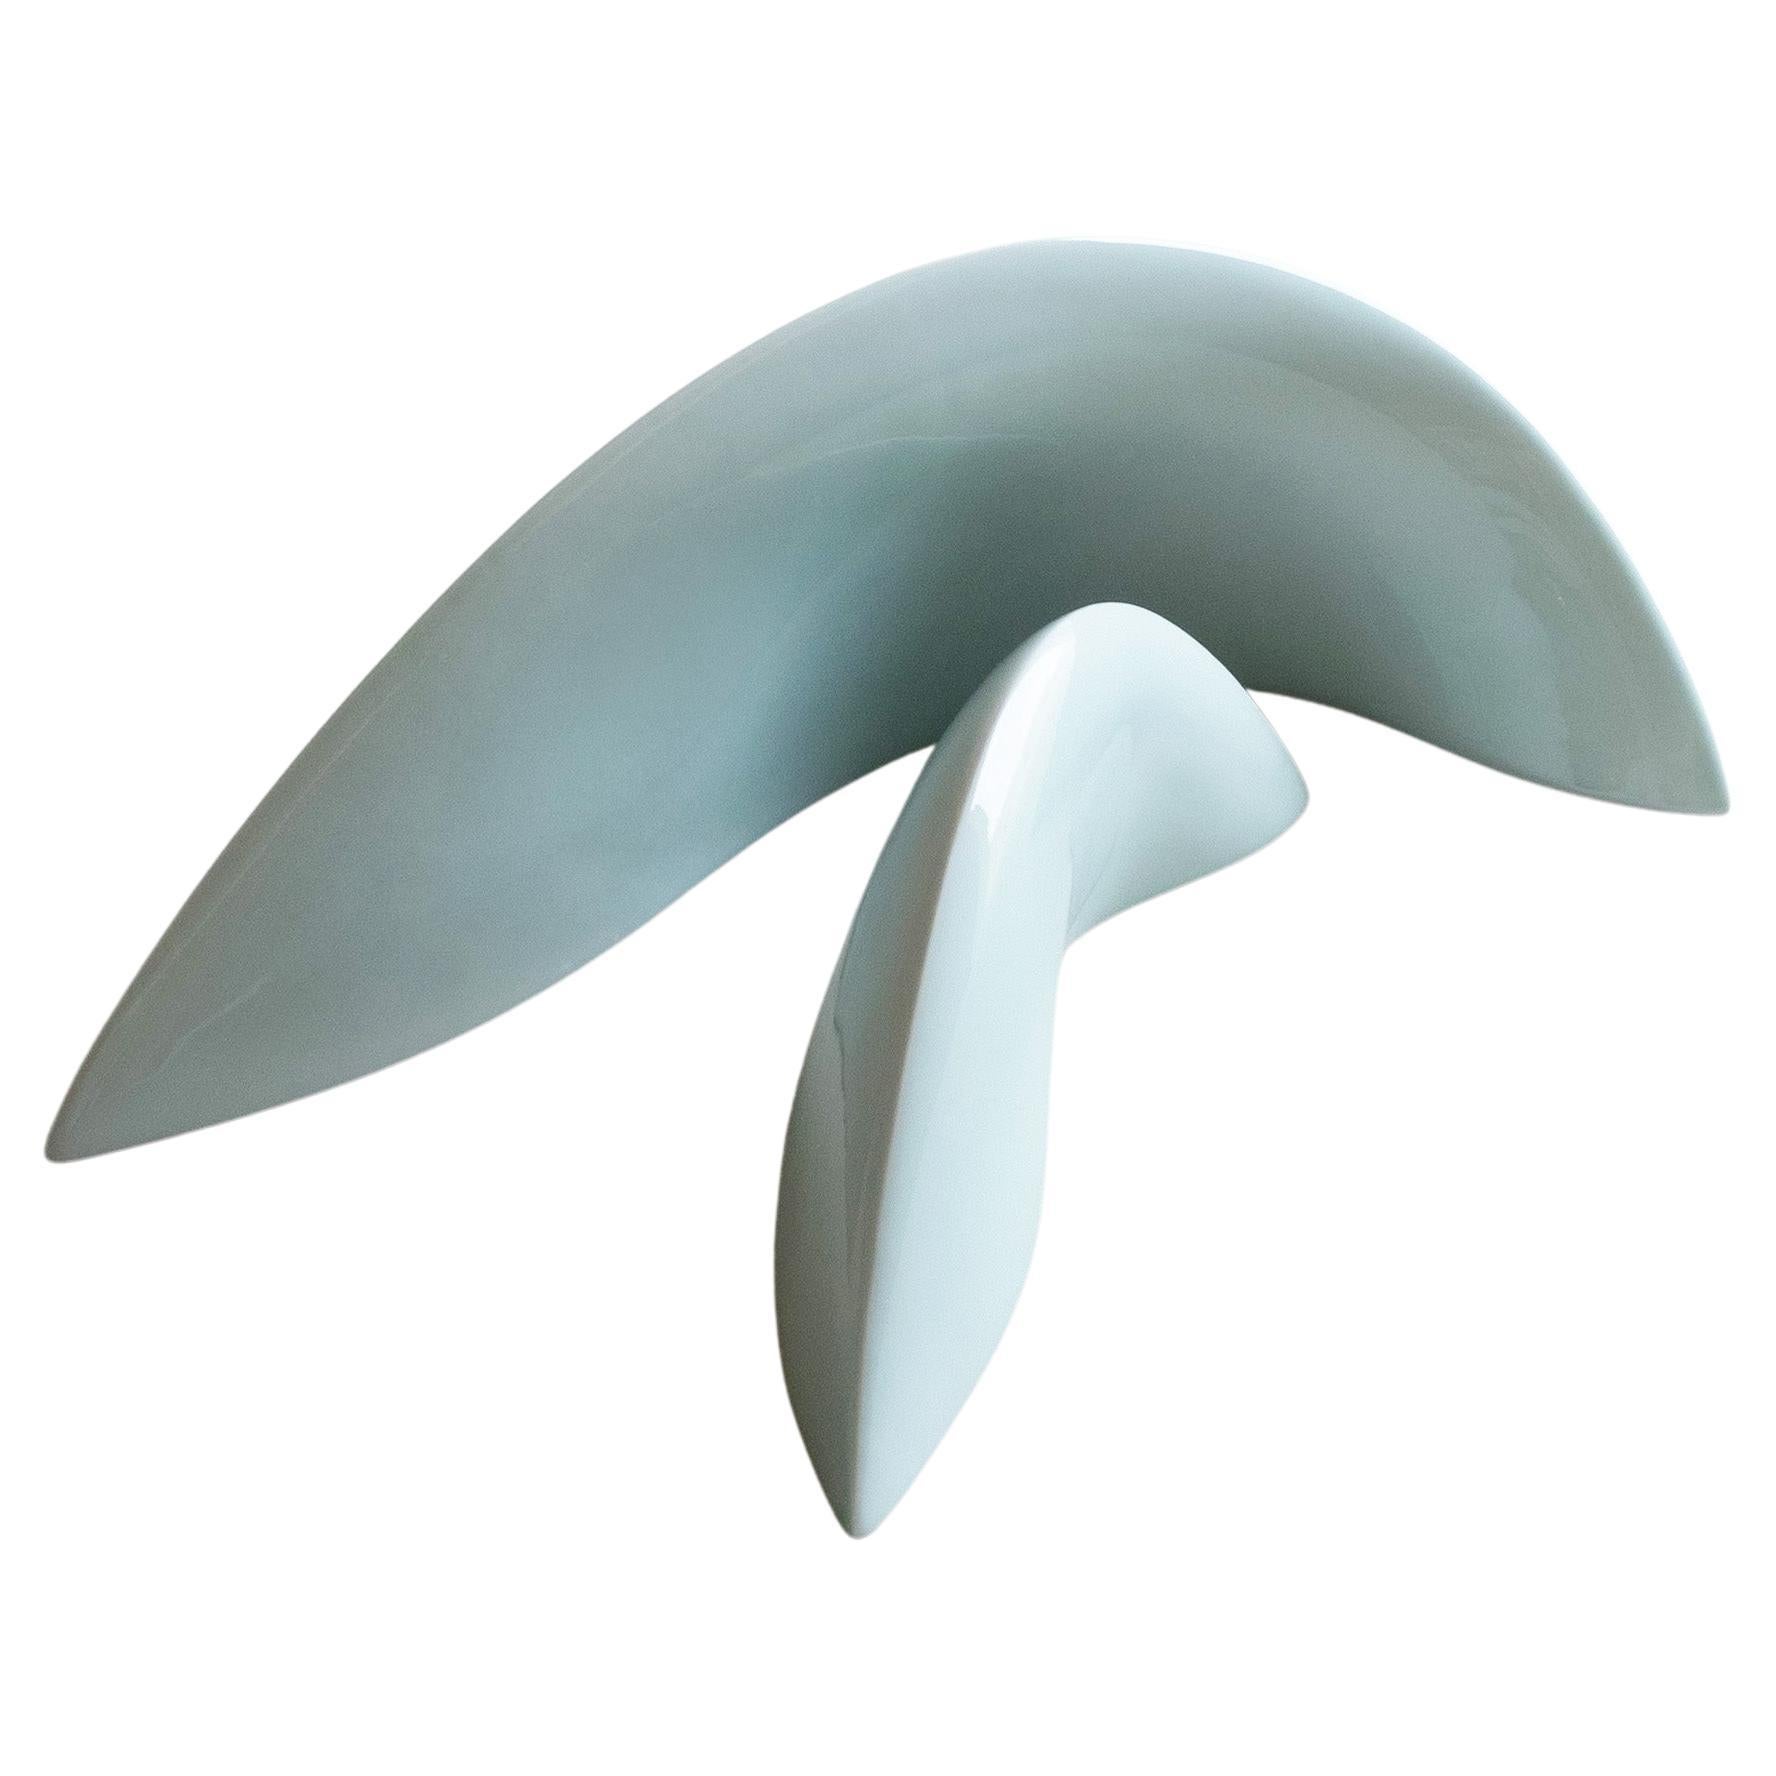 Abstract Table Sculpture - Ceramic Celadon Sculpture Pair by Soo Joo For Sale